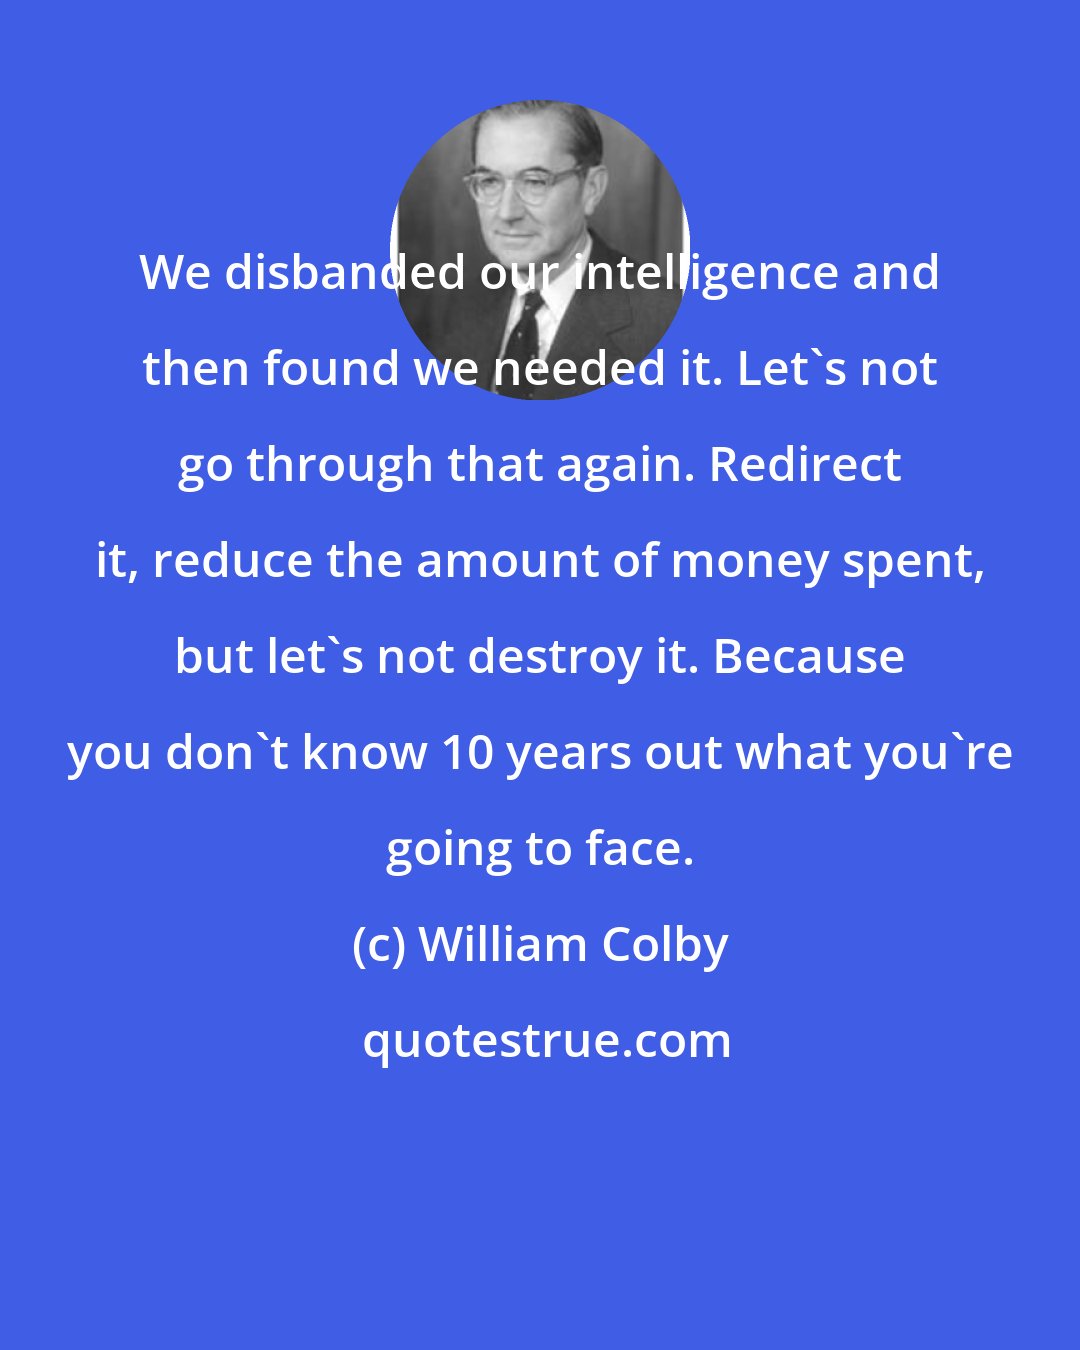 William Colby: We disbanded our intelligence and then found we needed it. Let's not go through that again. Redirect it, reduce the amount of money spent, but let's not destroy it. Because you don't know 10 years out what you're going to face.